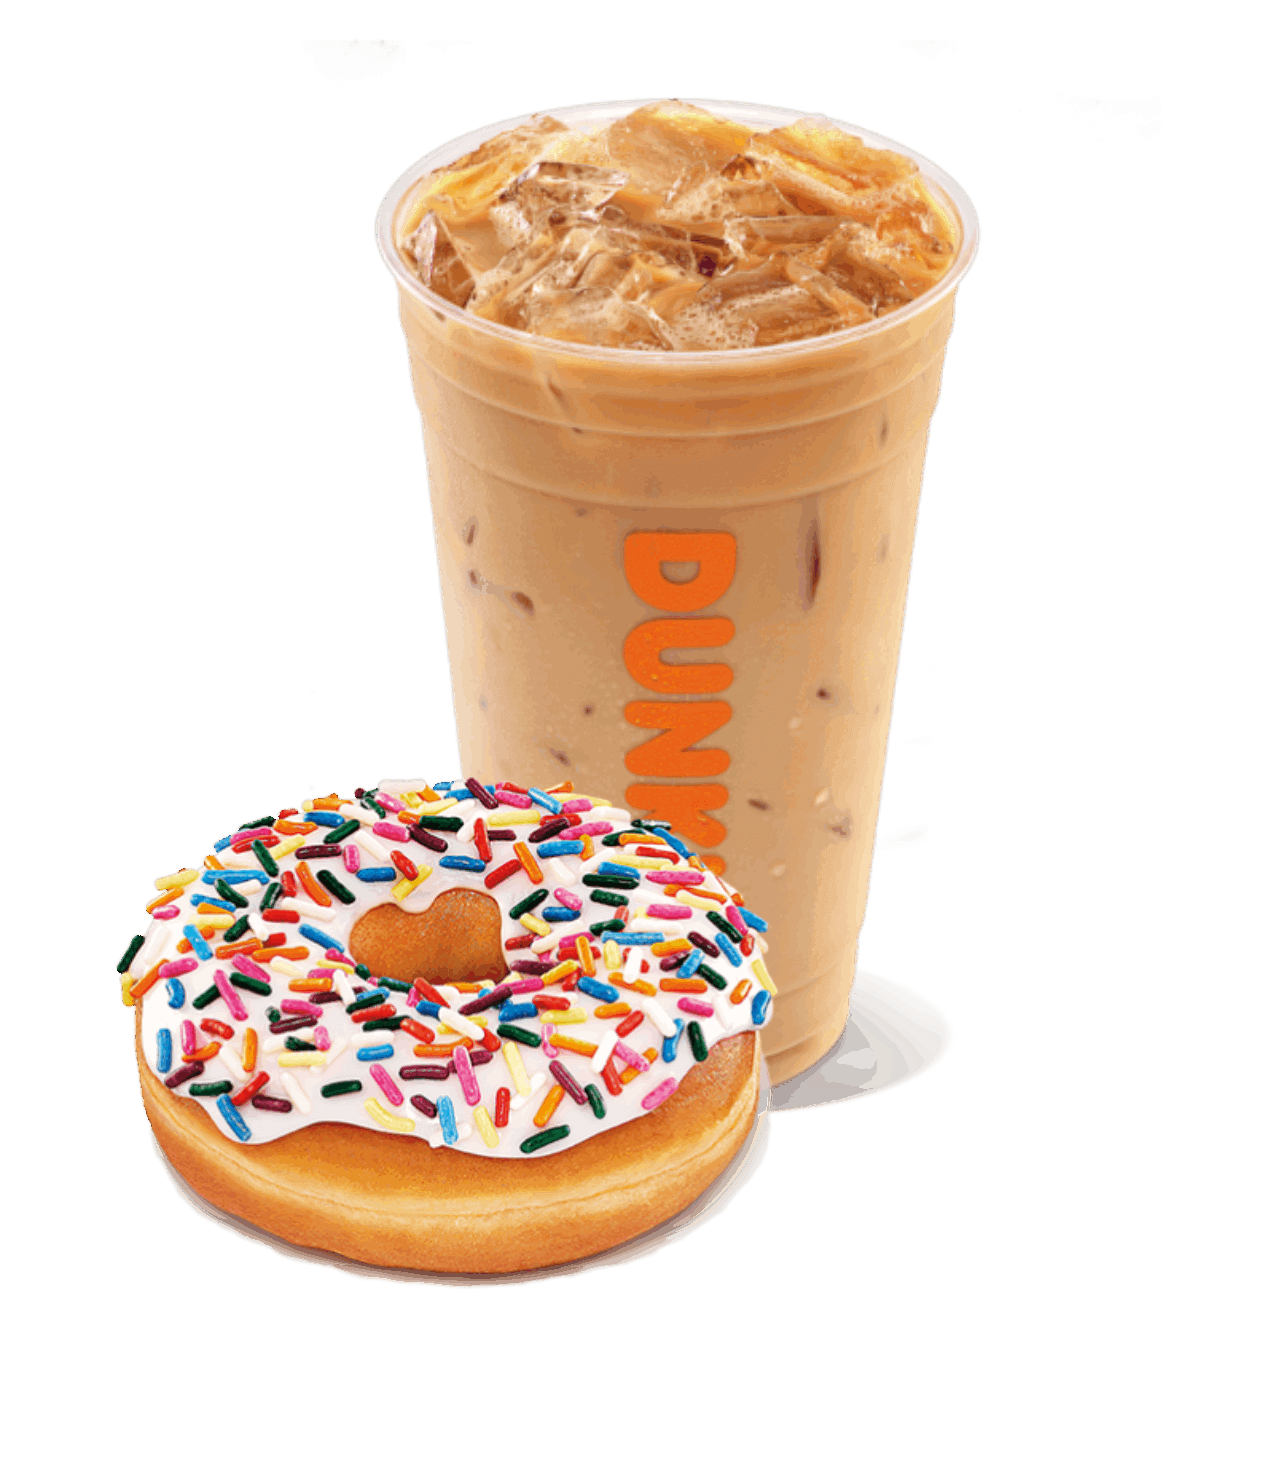 HOME ICE ADVANTAGE: DUNKIN' DONUTS INTRODUCES ICED COFFEE K-CUP